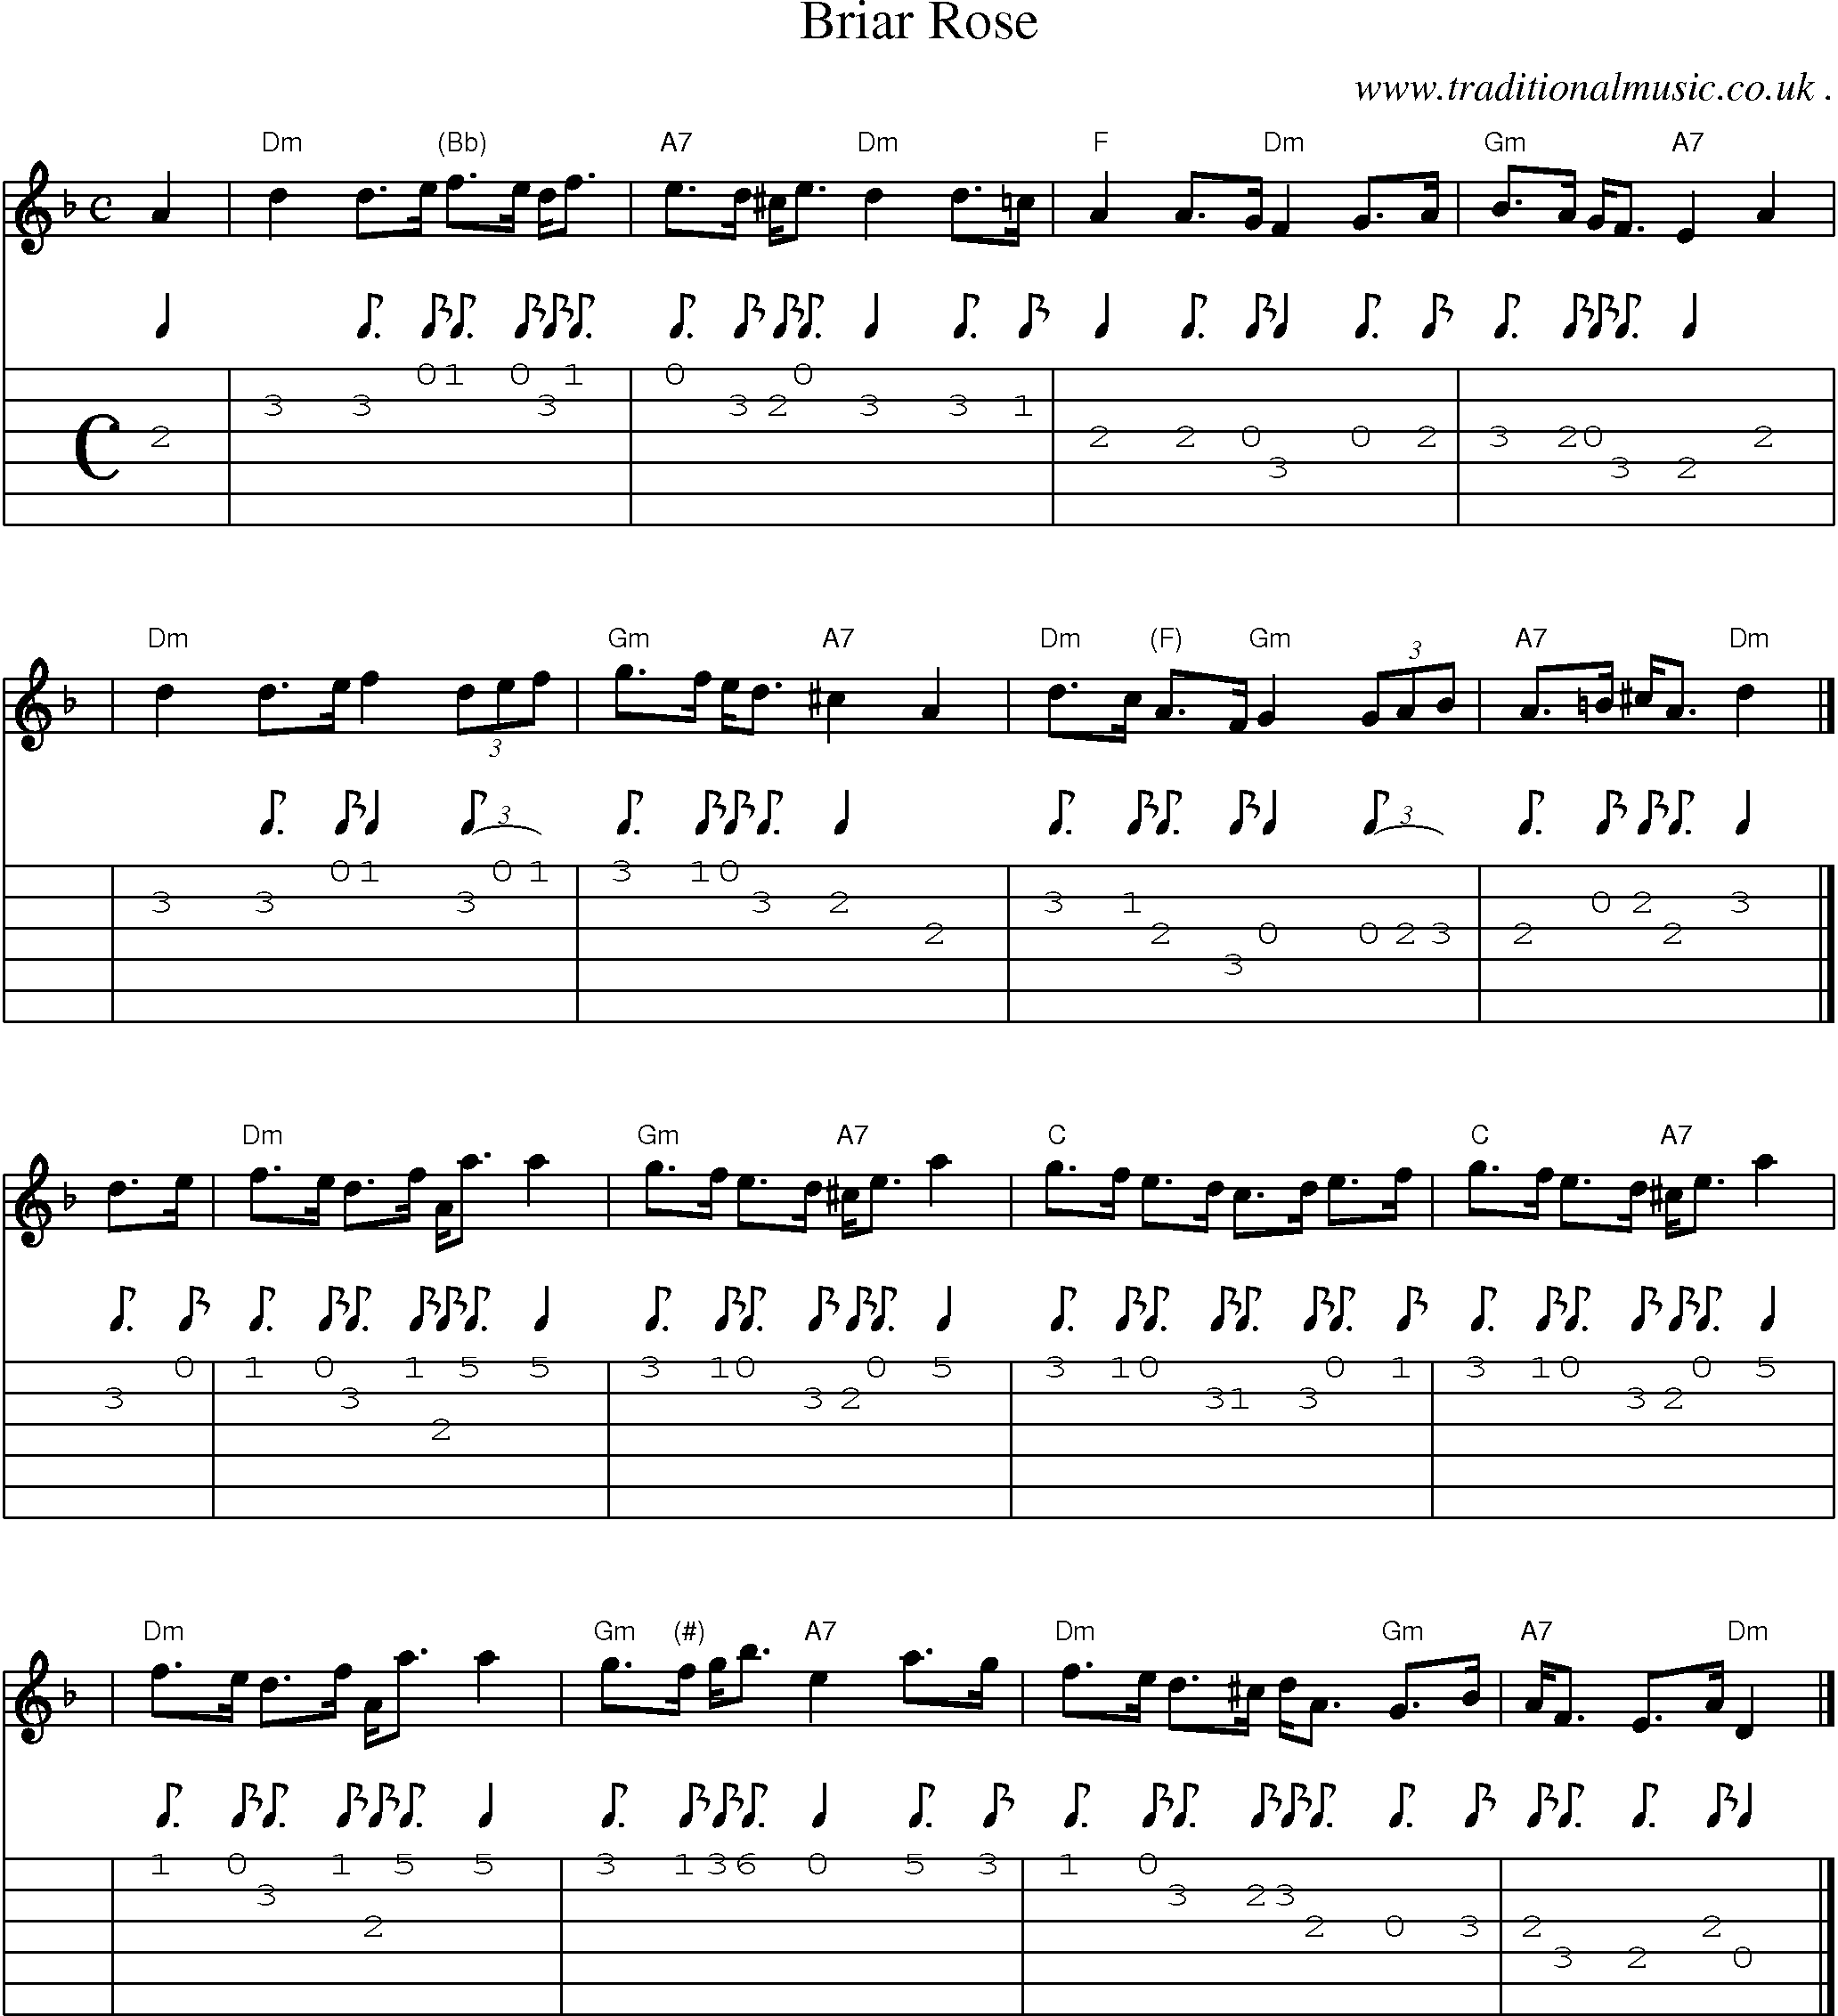 Sheet-music  score, Chords and Guitar Tabs for Briar Rose